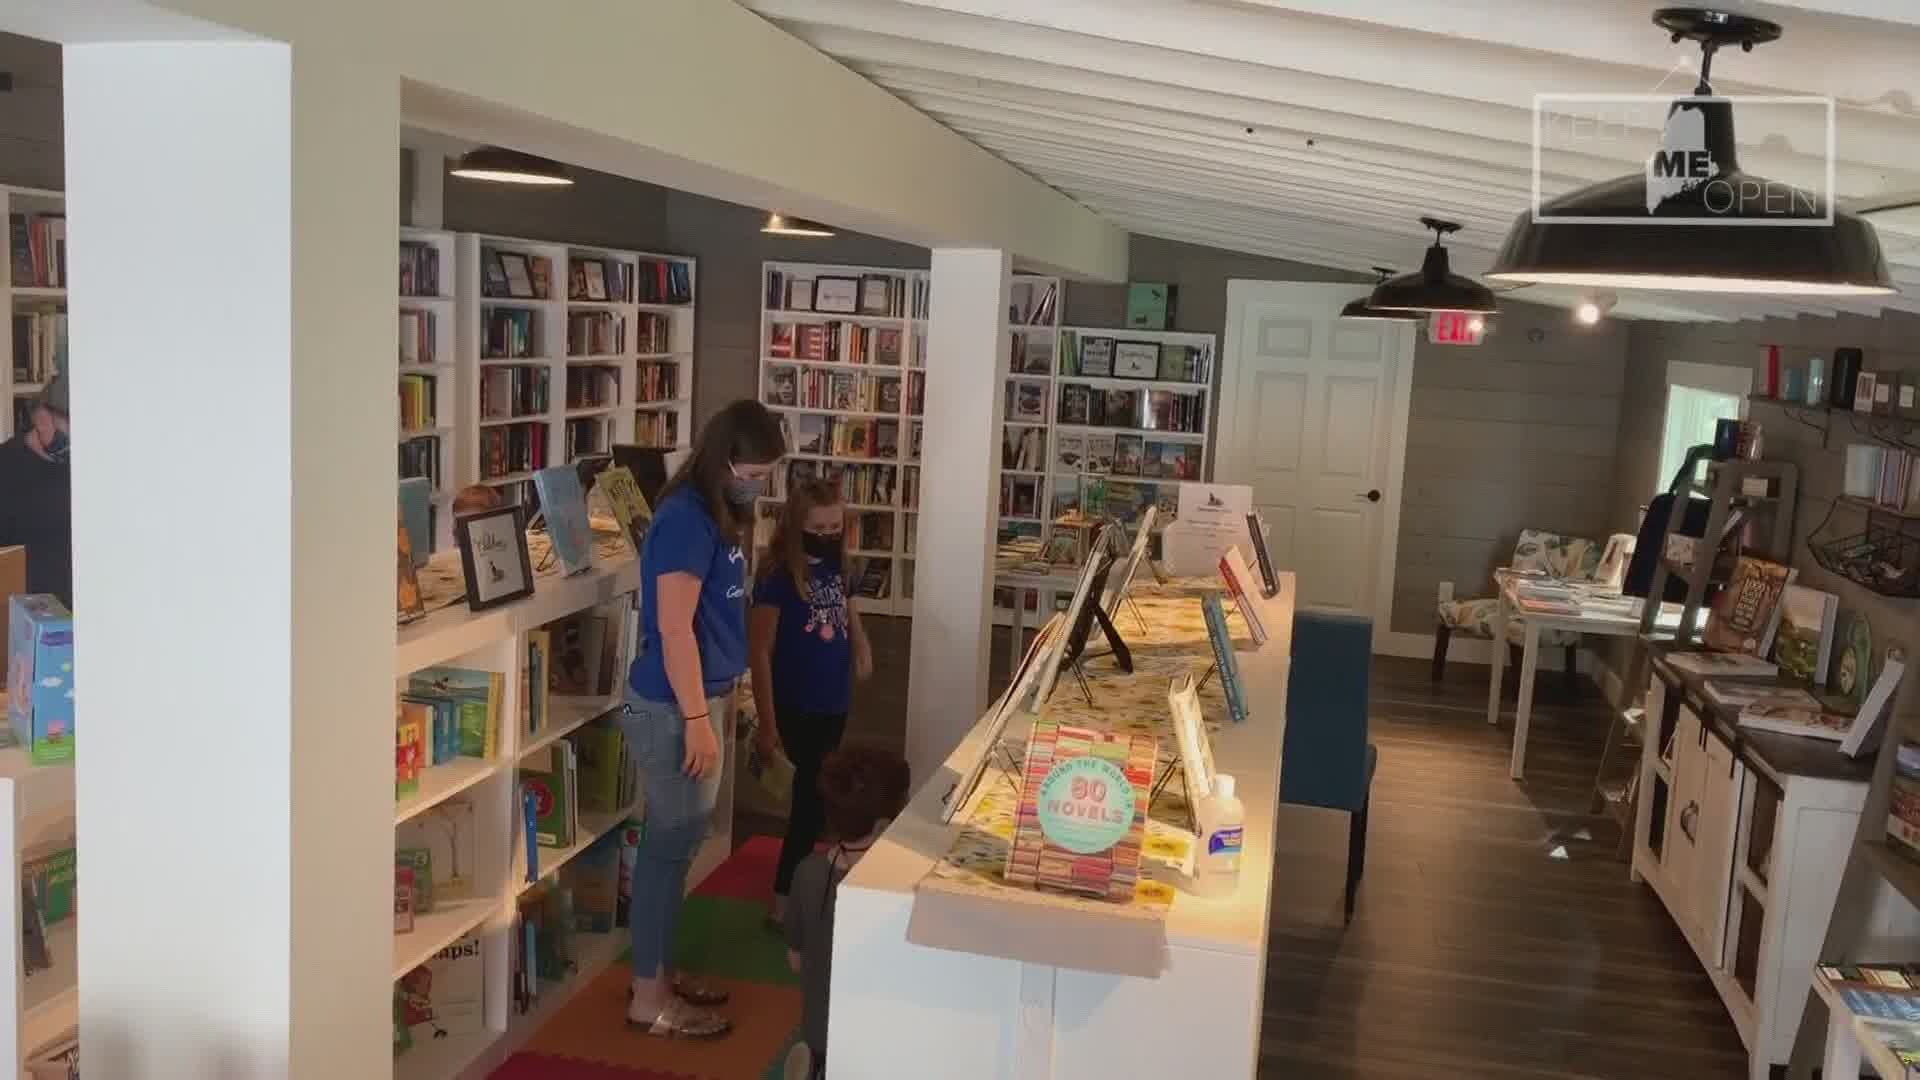 'Oliver & Friends Bookshop and Reading Room' opened last month in the middle of a pandemic, so a Belgrade teacher fundraised and gave her 19 students gift cards!